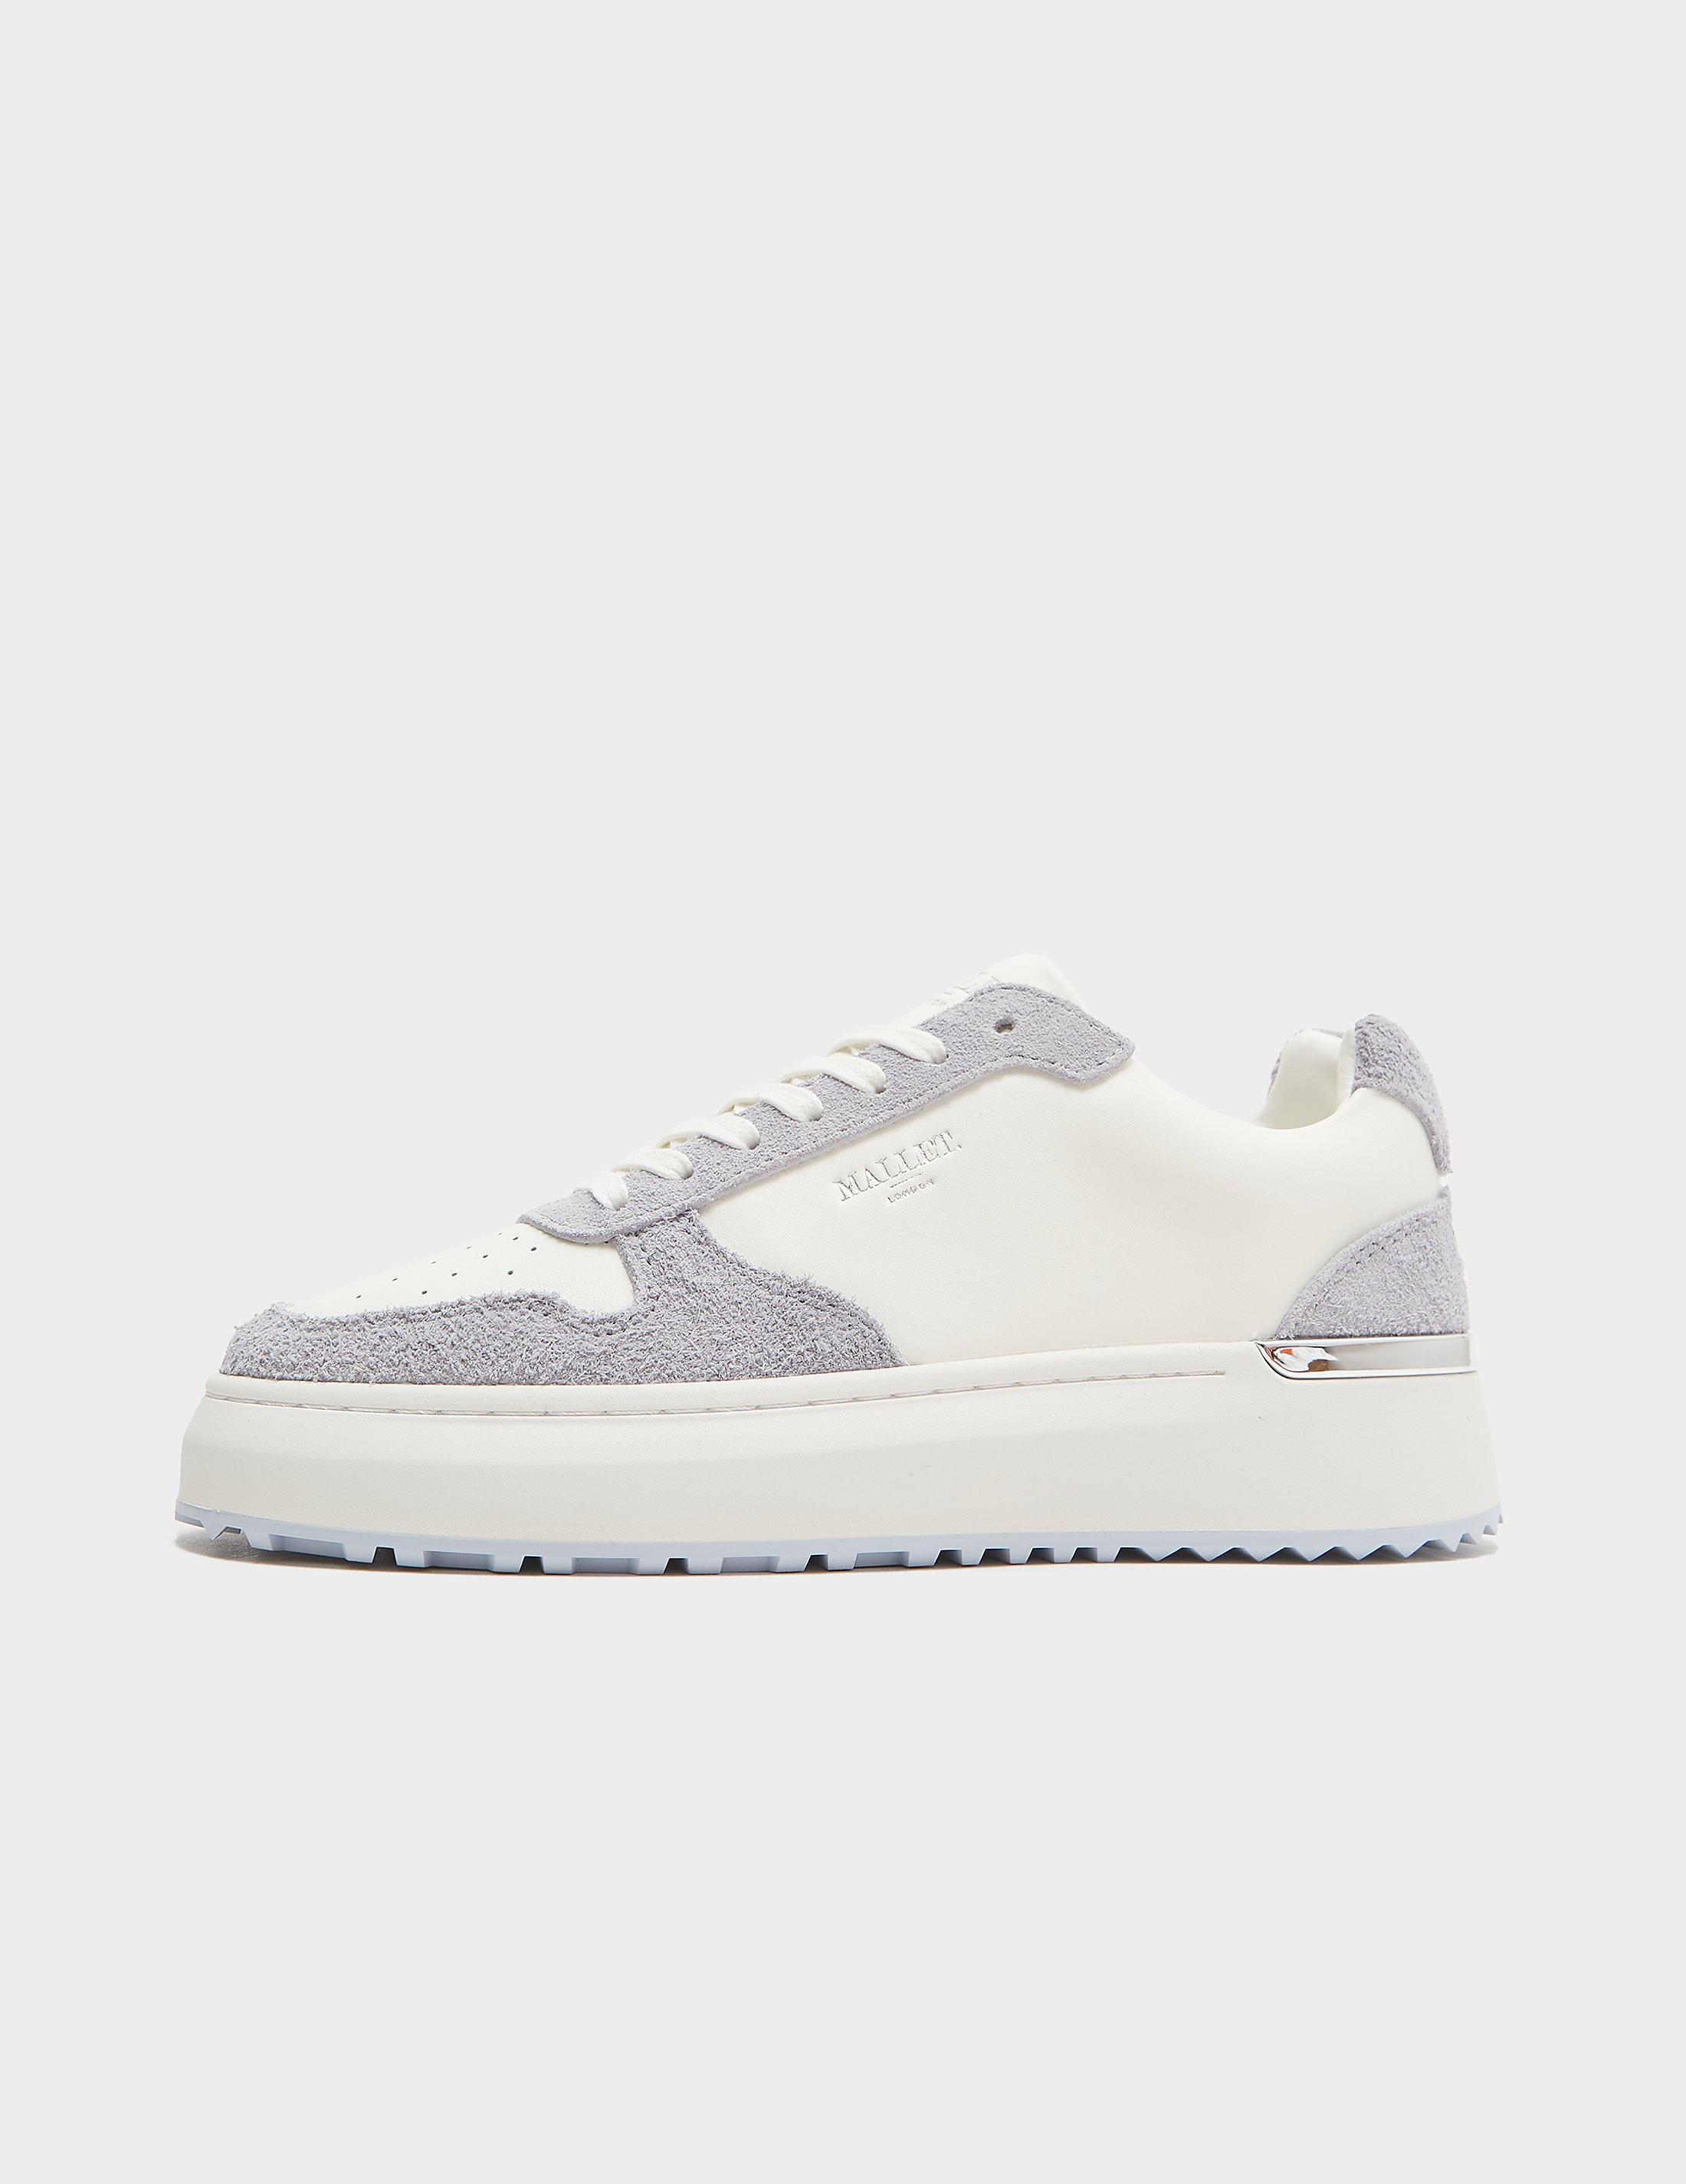 Mallet Hoxton 2.0 Trainers in White | Lyst